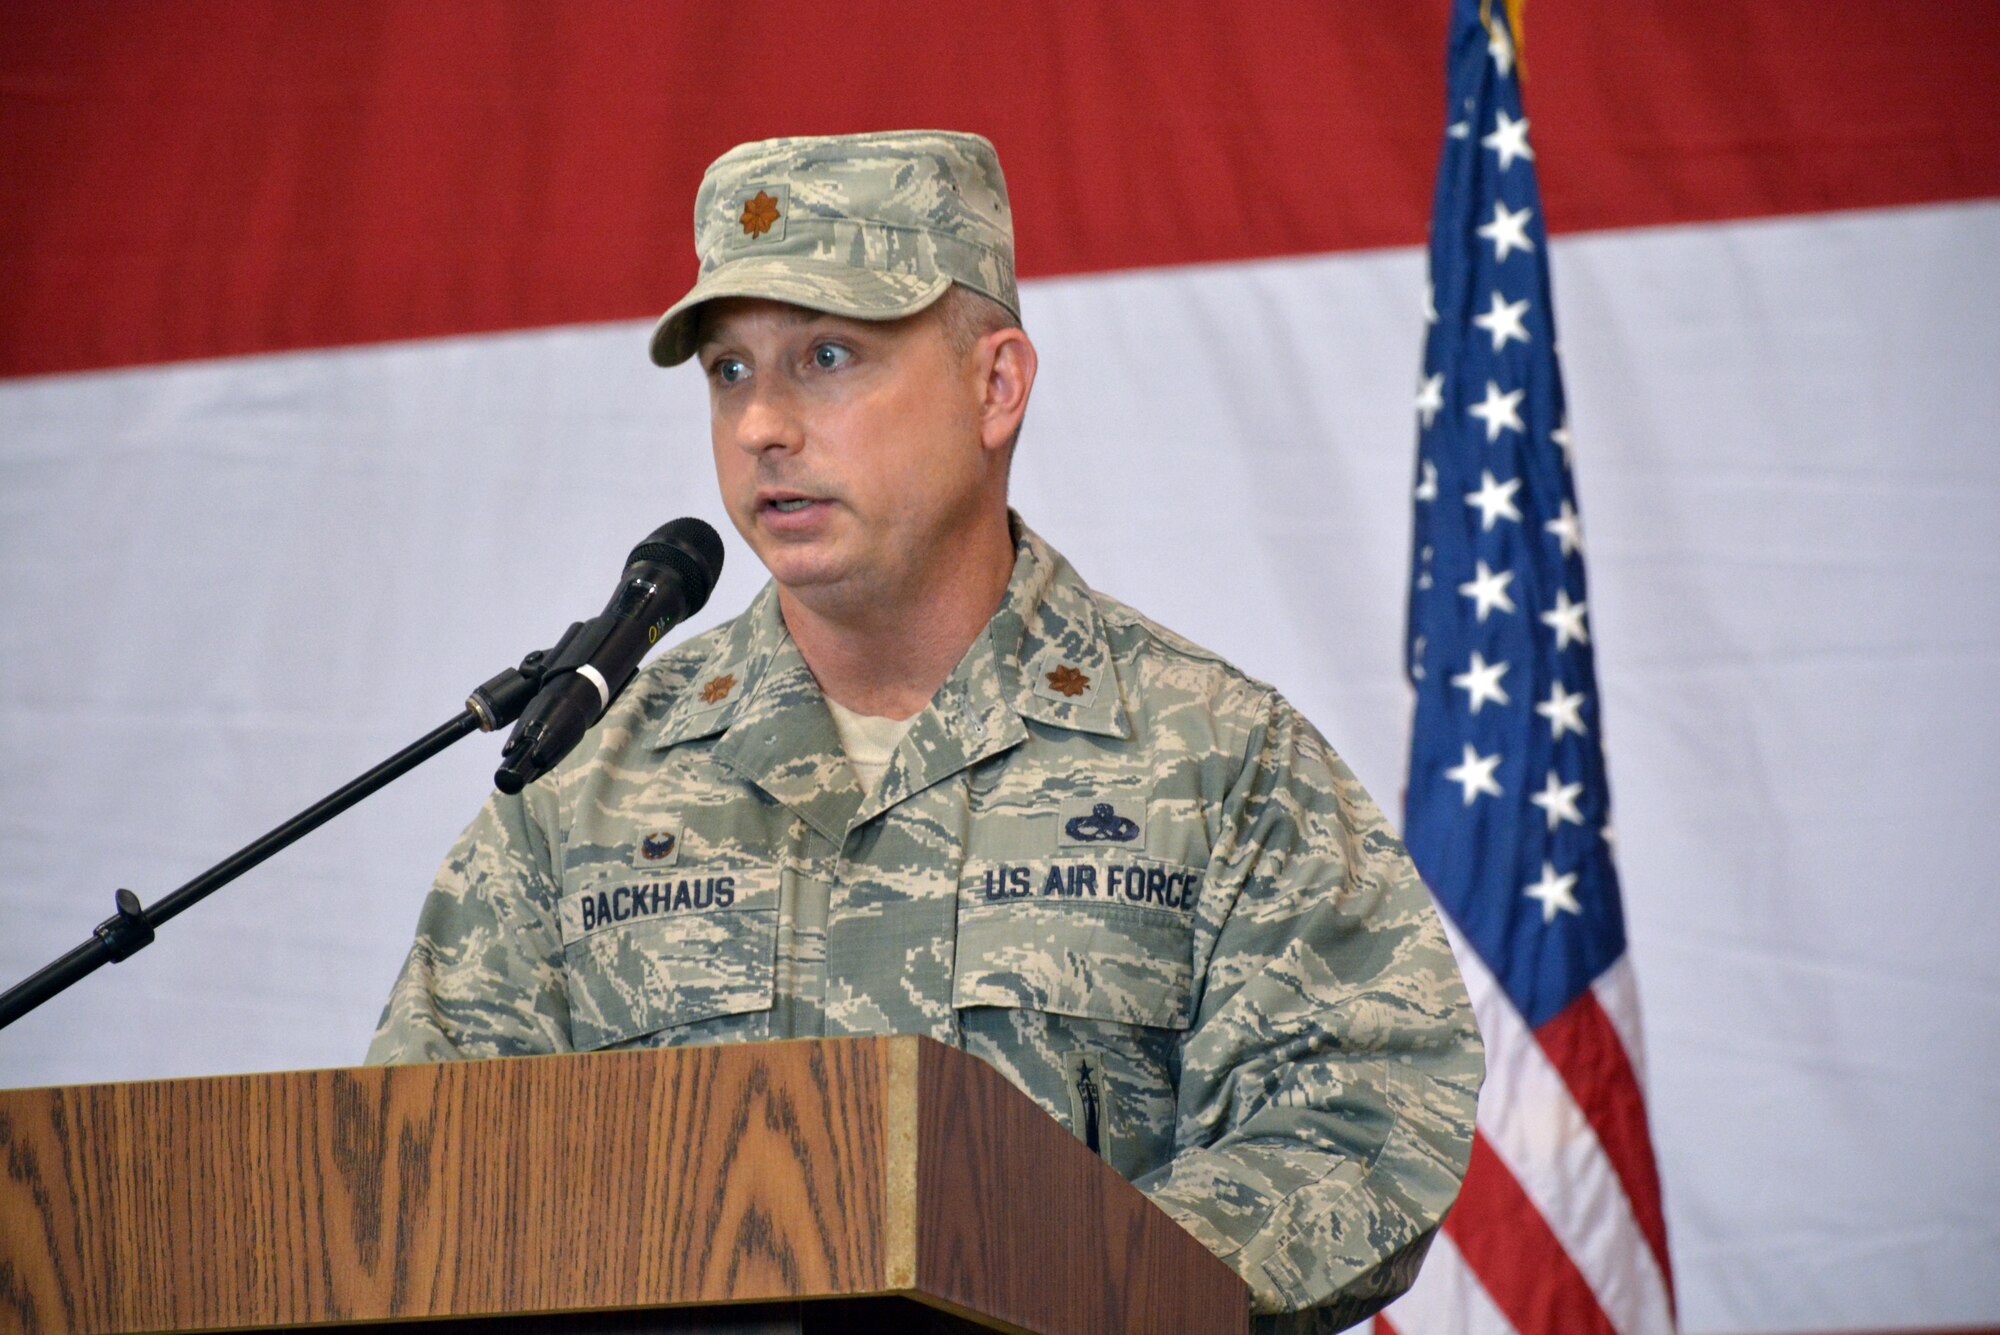 Maj. Christian Backhaus addresses the crowd for the first time after assuming command of the 552nd Aircraft Maintenance Squadron in a ceremony Monday in Bldg. 230, Dock 2. Major Backhaus replaces Lt. Col. Ronald Llantada, who recently took over as deputy commander for the 461st Maintenance Group at Robins Air Force Base, Ga. Major Backhaus previously served as commander of the 380th Expeditionary Maintenance Squadron at Al Dhafra Air Base, United Arab Emirates. Col. Andre Kennedy, 552nd Maintenance Group commander, presided over the ceremony attended by a host of family, friends and co-workers. (Air Force photo by Darren D. Heusel/Released)